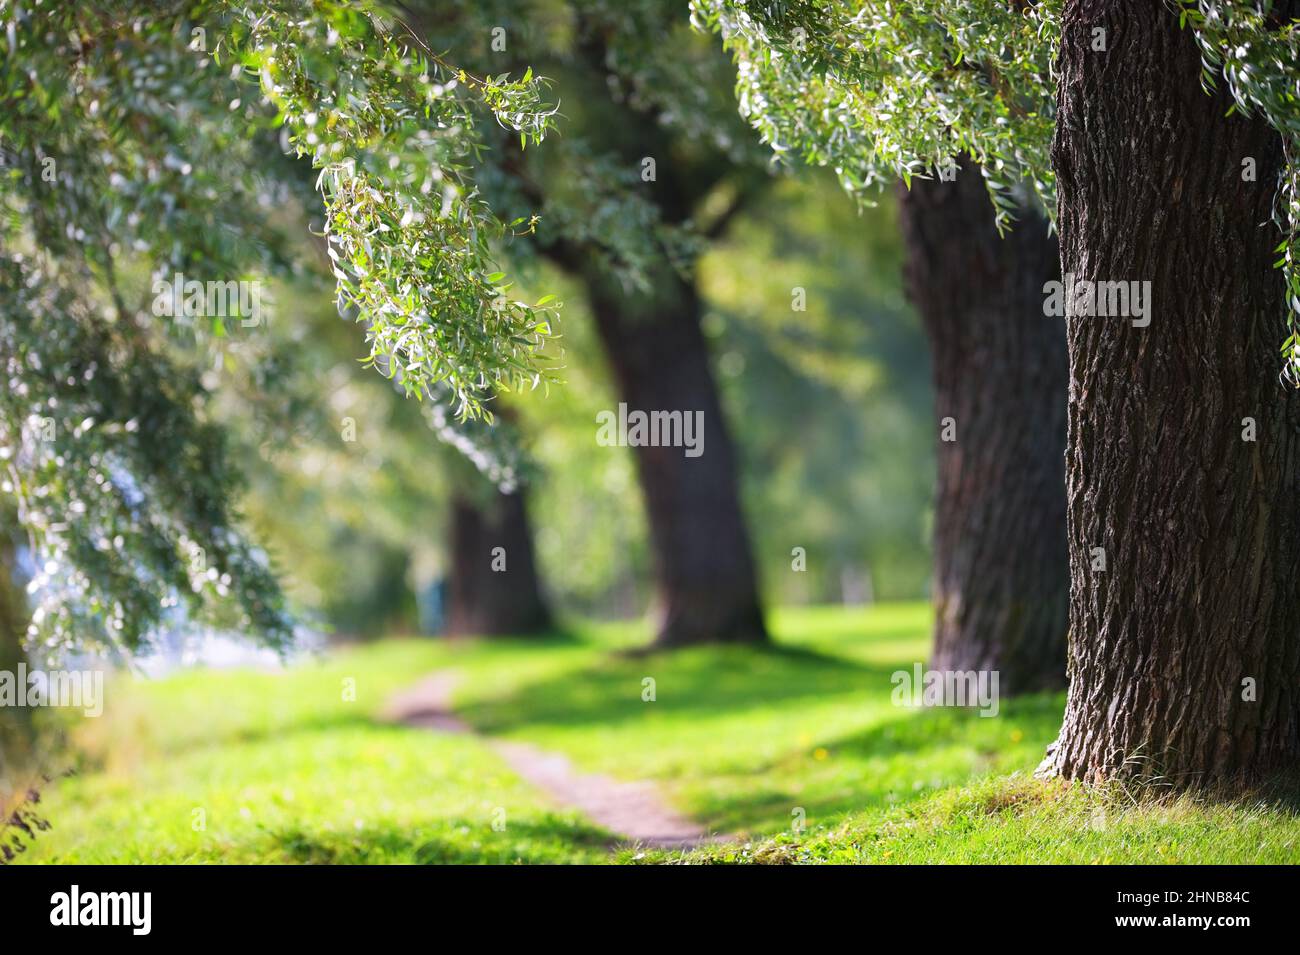 White Willow trees (Salix alba var. sericea 'Sibirica') in the park. Focus on foreground tree trunk. Shallow depth of field. Stock Photo